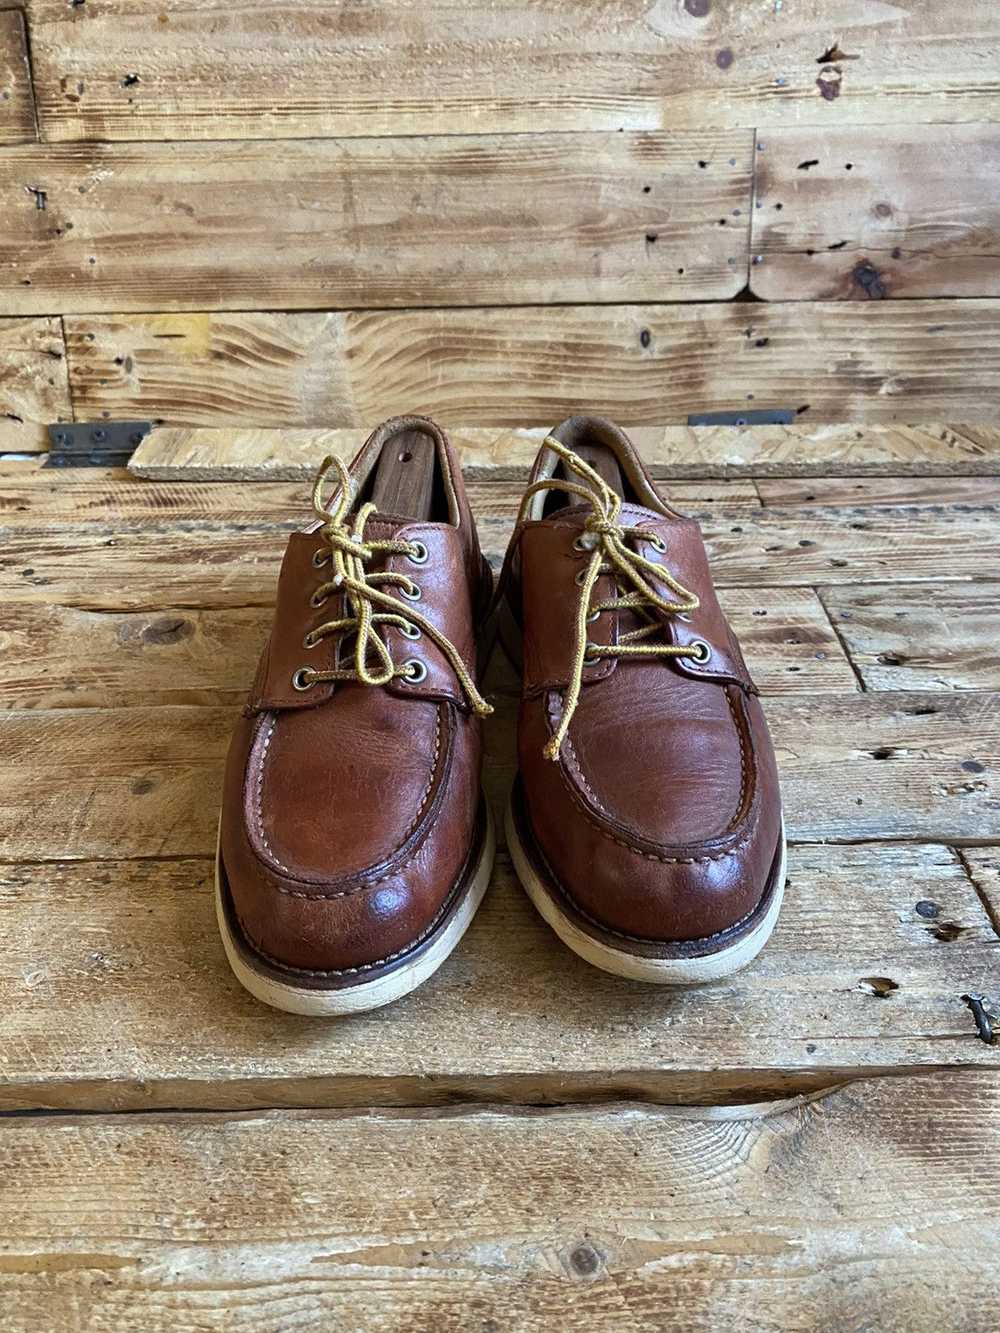 Red Wing Redwing oxford ,style 3112 sz US8.5 - image 3